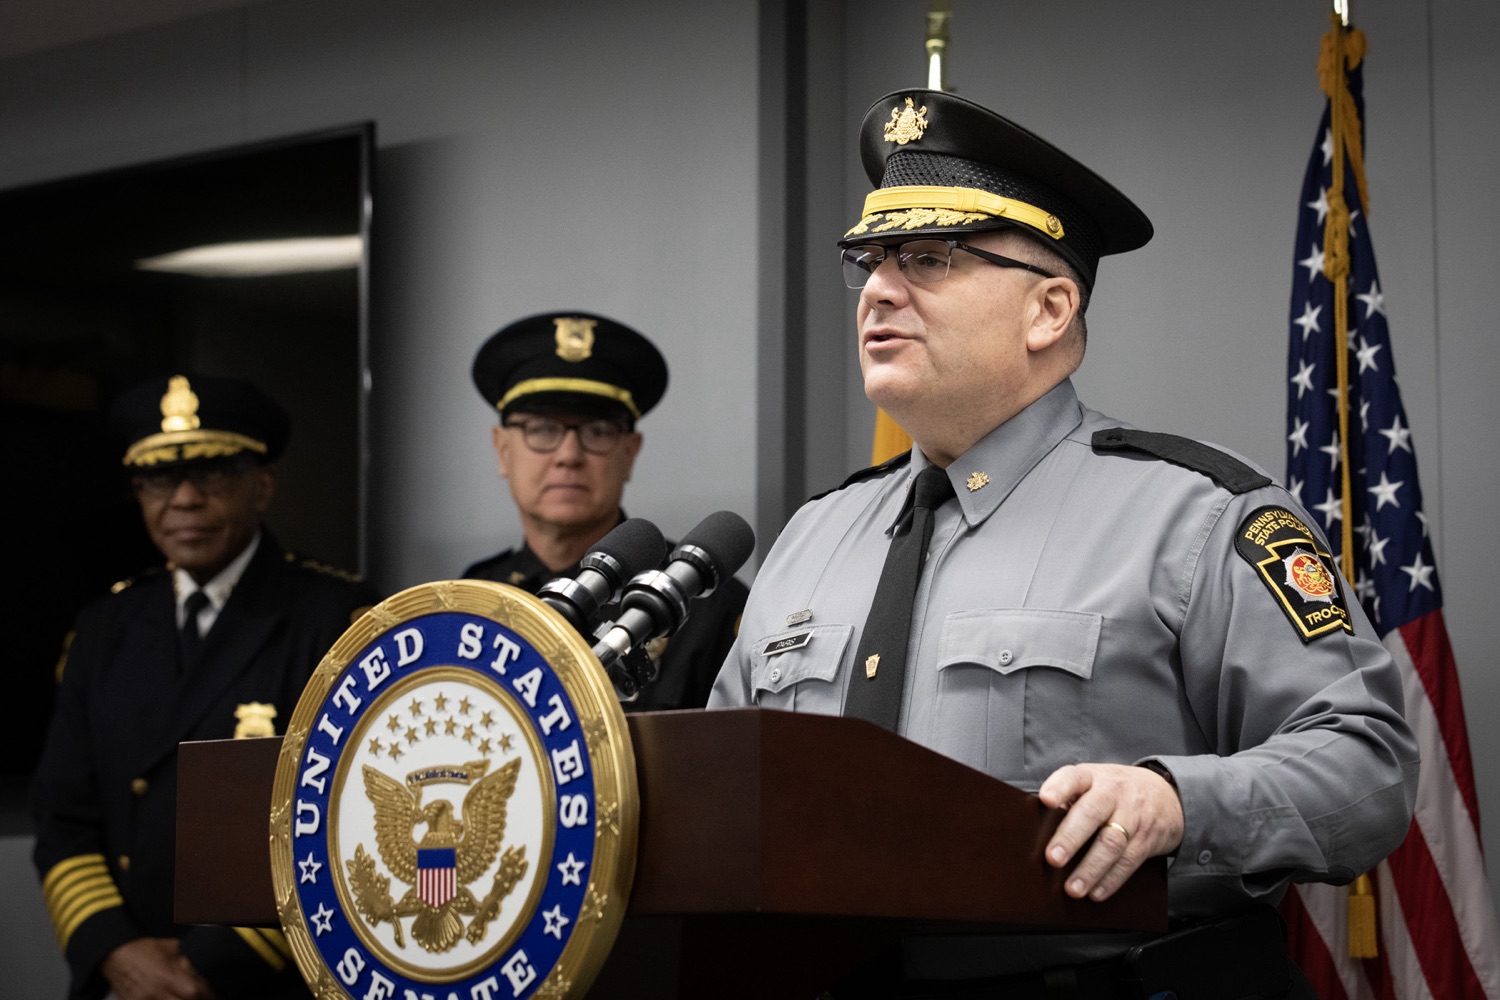 Senator Bob Casey visited Pennsylvania State Police Headquarters to discuss his proposed Stop Fentanyl at the Border Act. Pictured here is Harrisburg Colonel Paris delivering remarks during the event. Harrisburg, Pennsylvania.<br><a href="https://filesource.amperwave.net/commonwealthofpa/photo/24347_psp_stopFentanyl_JP_10.jpg" target="_blank">⇣ Download Photo</a>